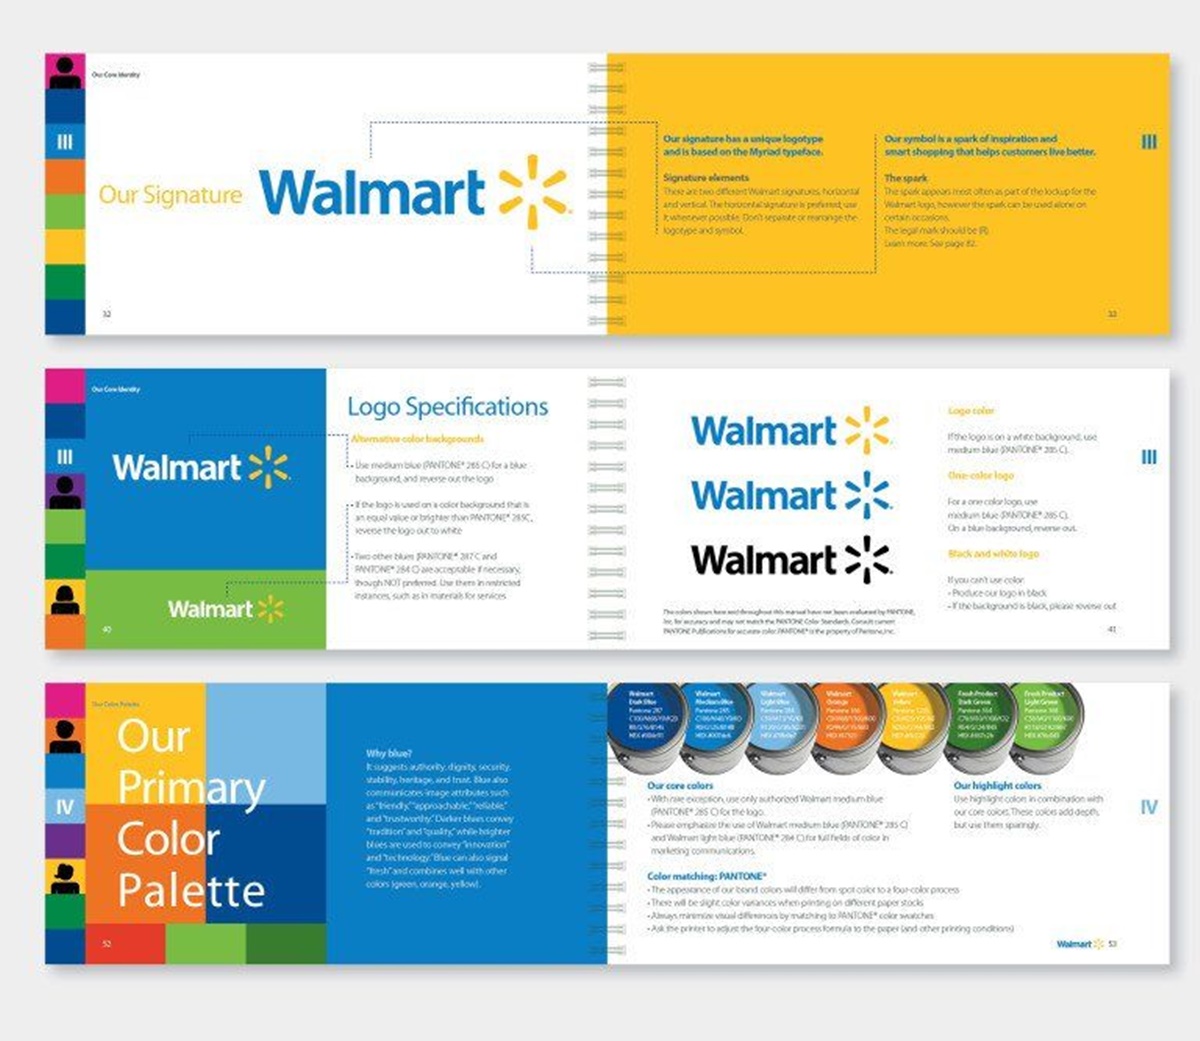 Check out Walmart if you are looking for a style guide inspiration walking the line between fun and trustworthy